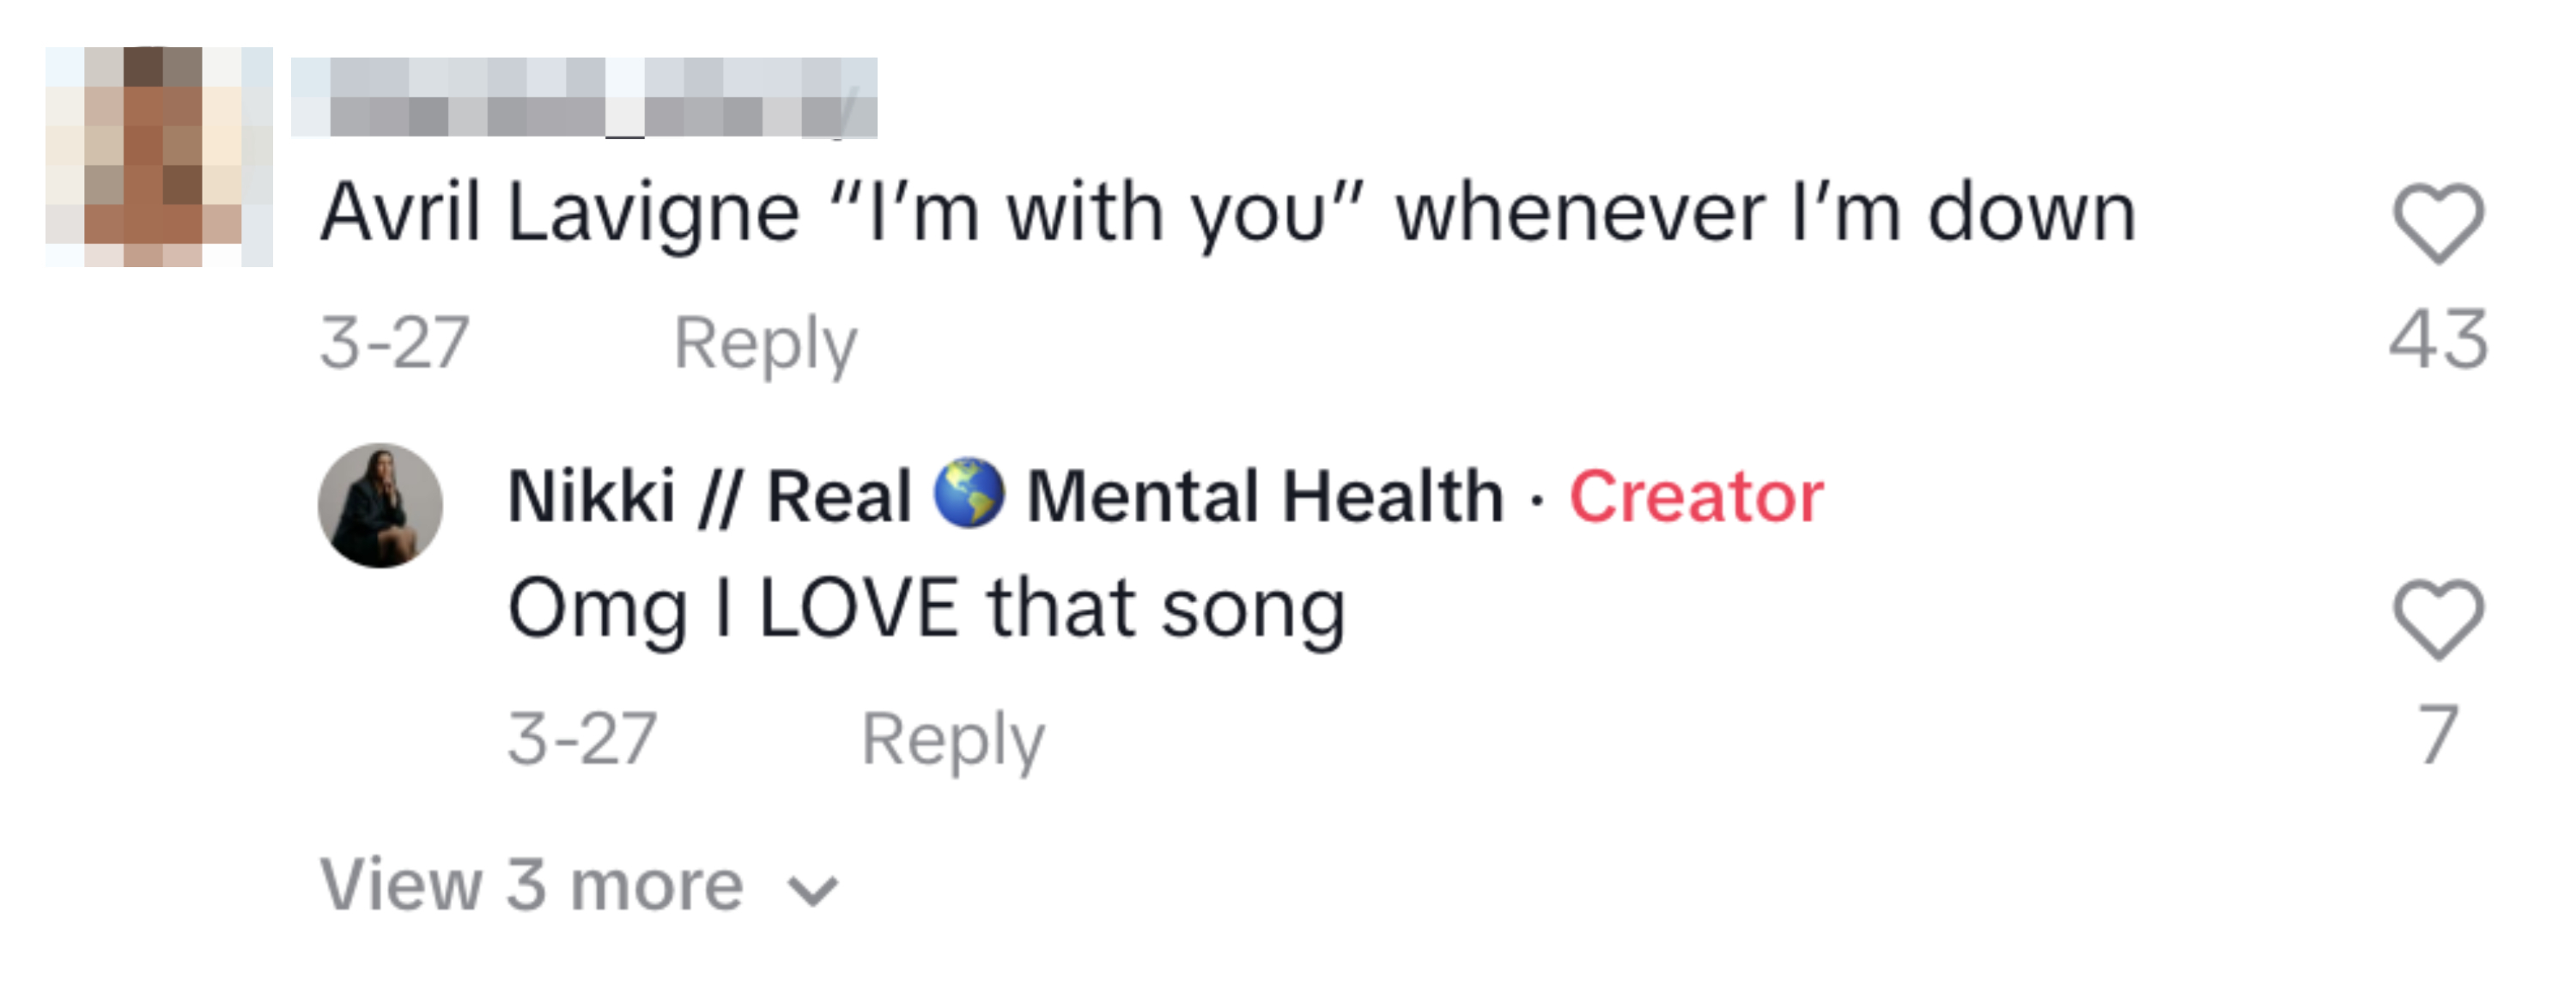 Two users&#x27; comments on a social media post discussing a song by Avril Lavigne